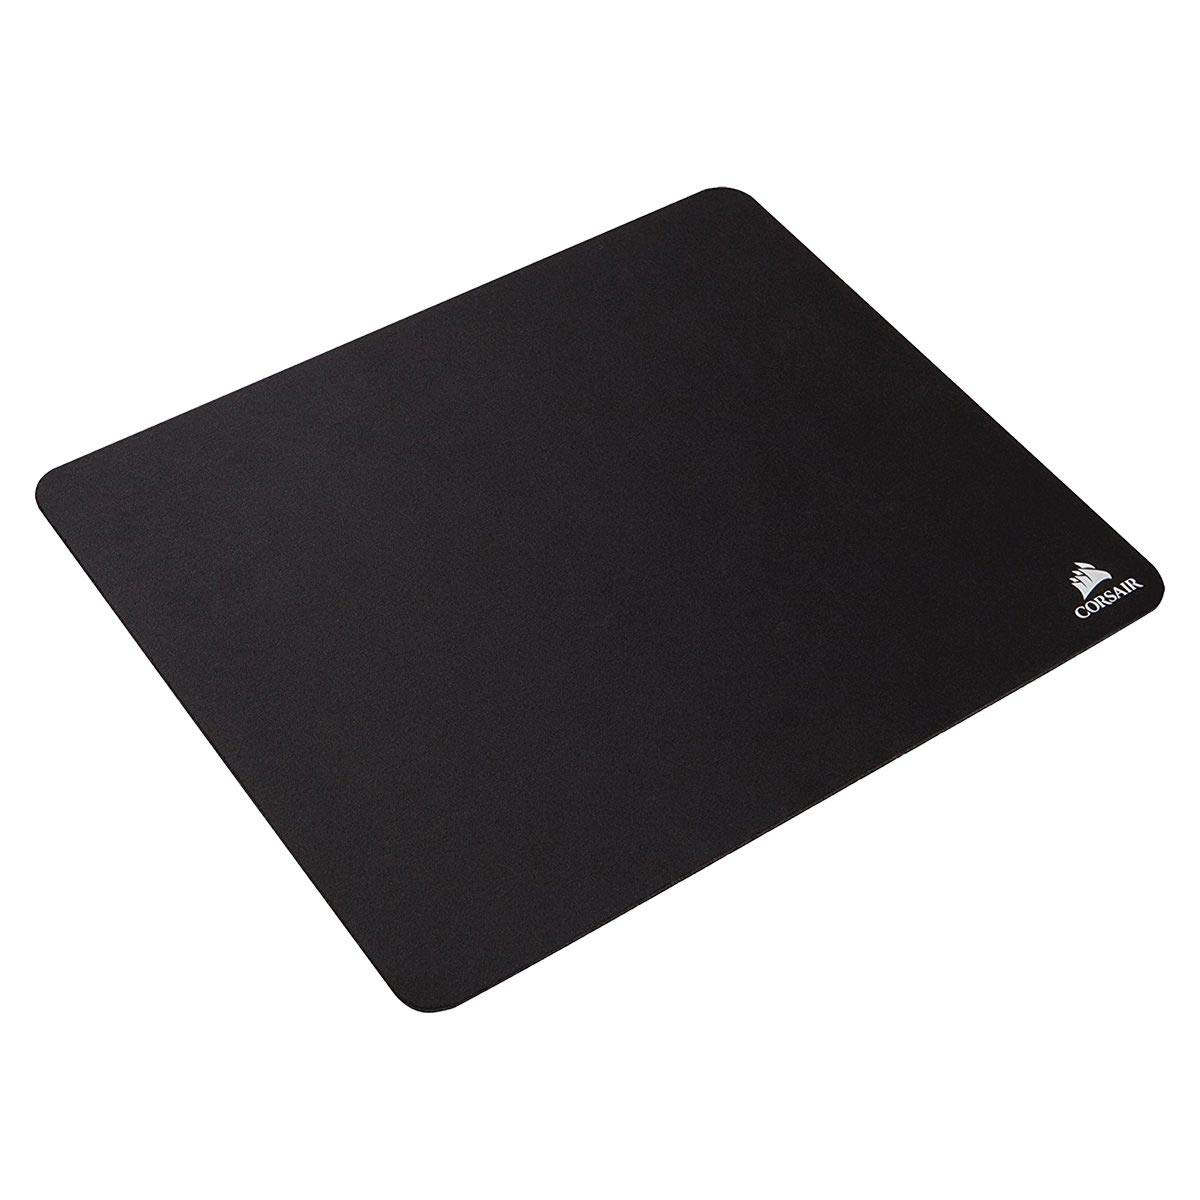 Corsair MM100 High Performance Gaming Mouse Pad $5 + Free Shipping w/ Prime or on $35+